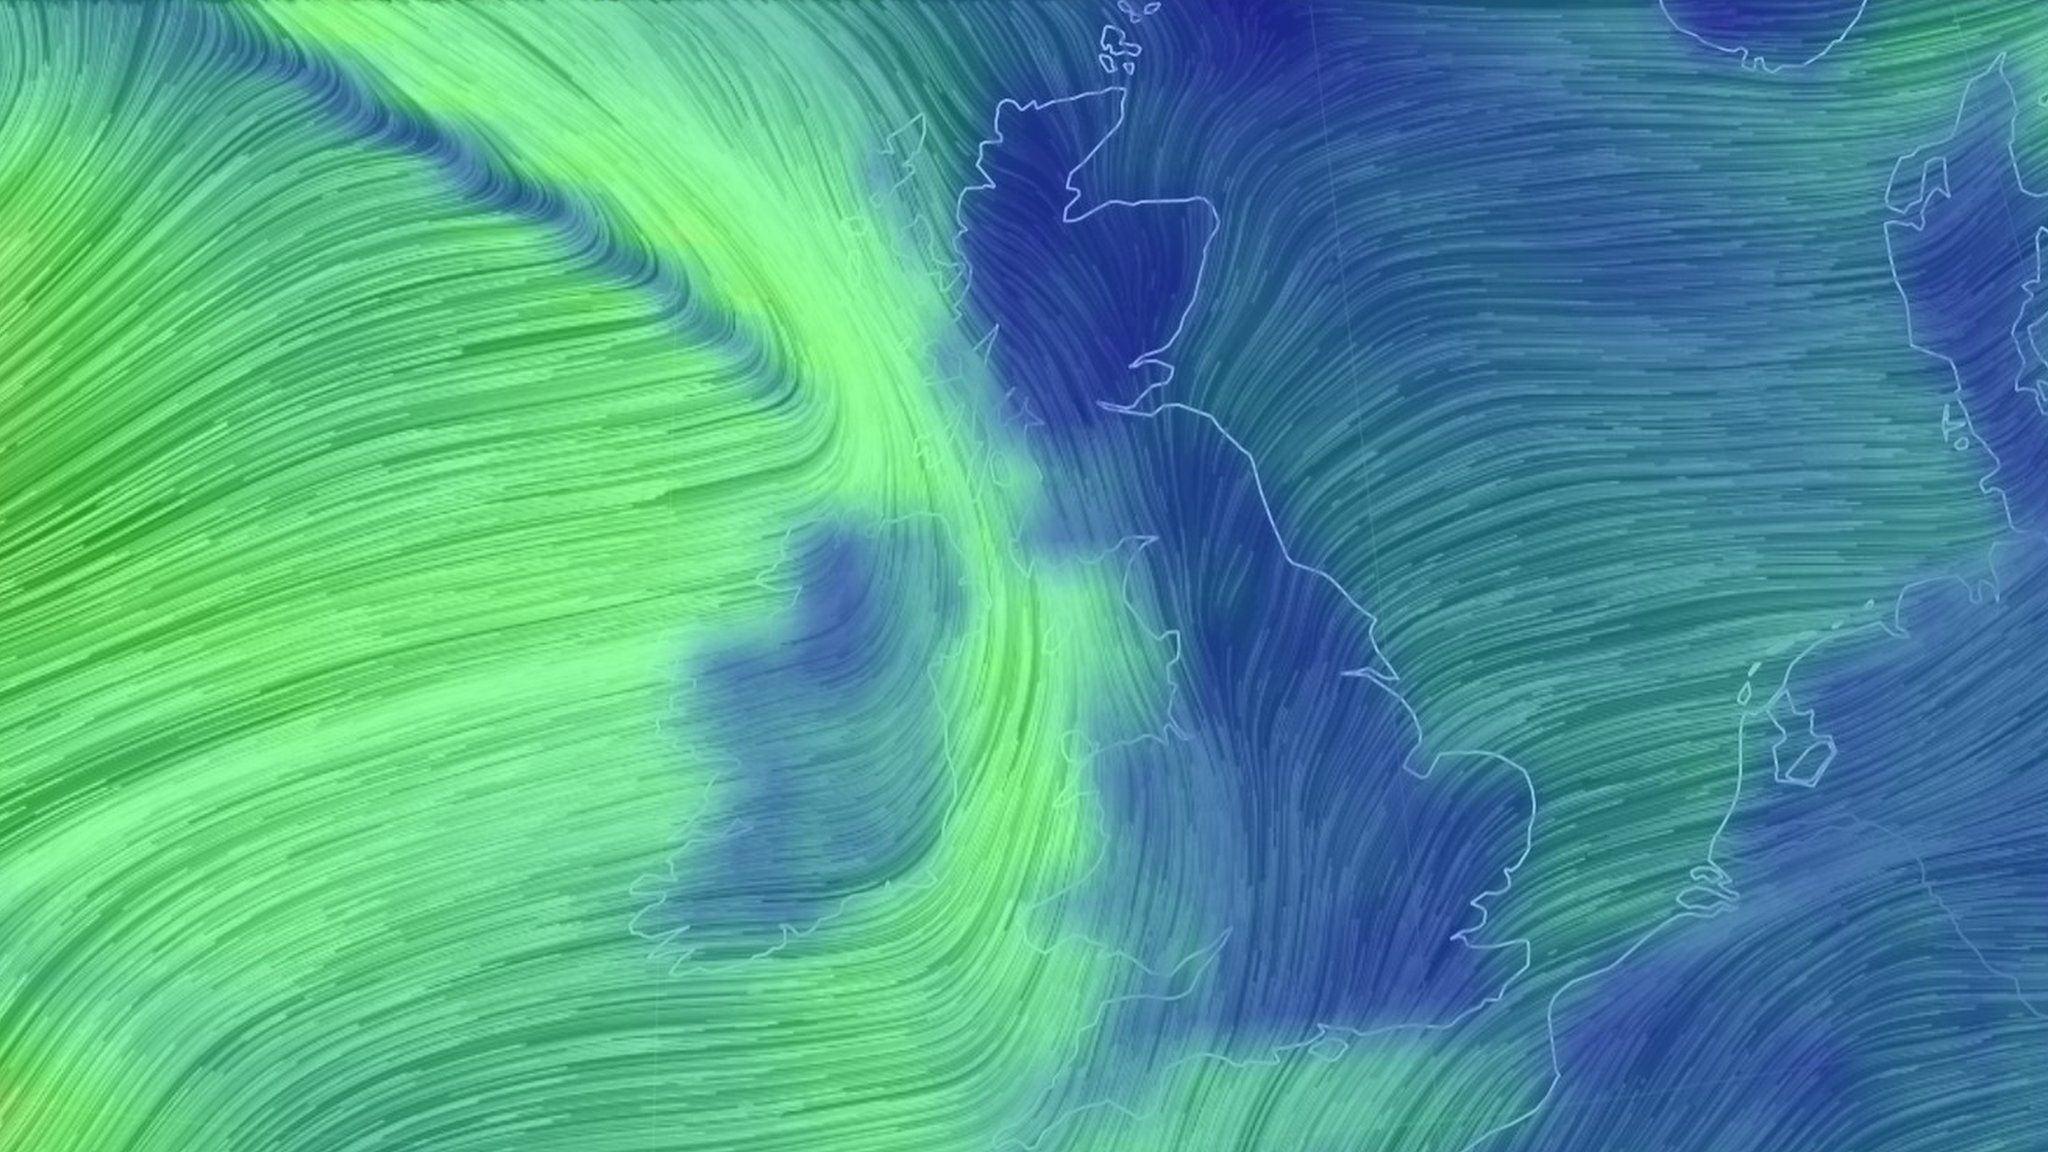 An illustration of expected high winds